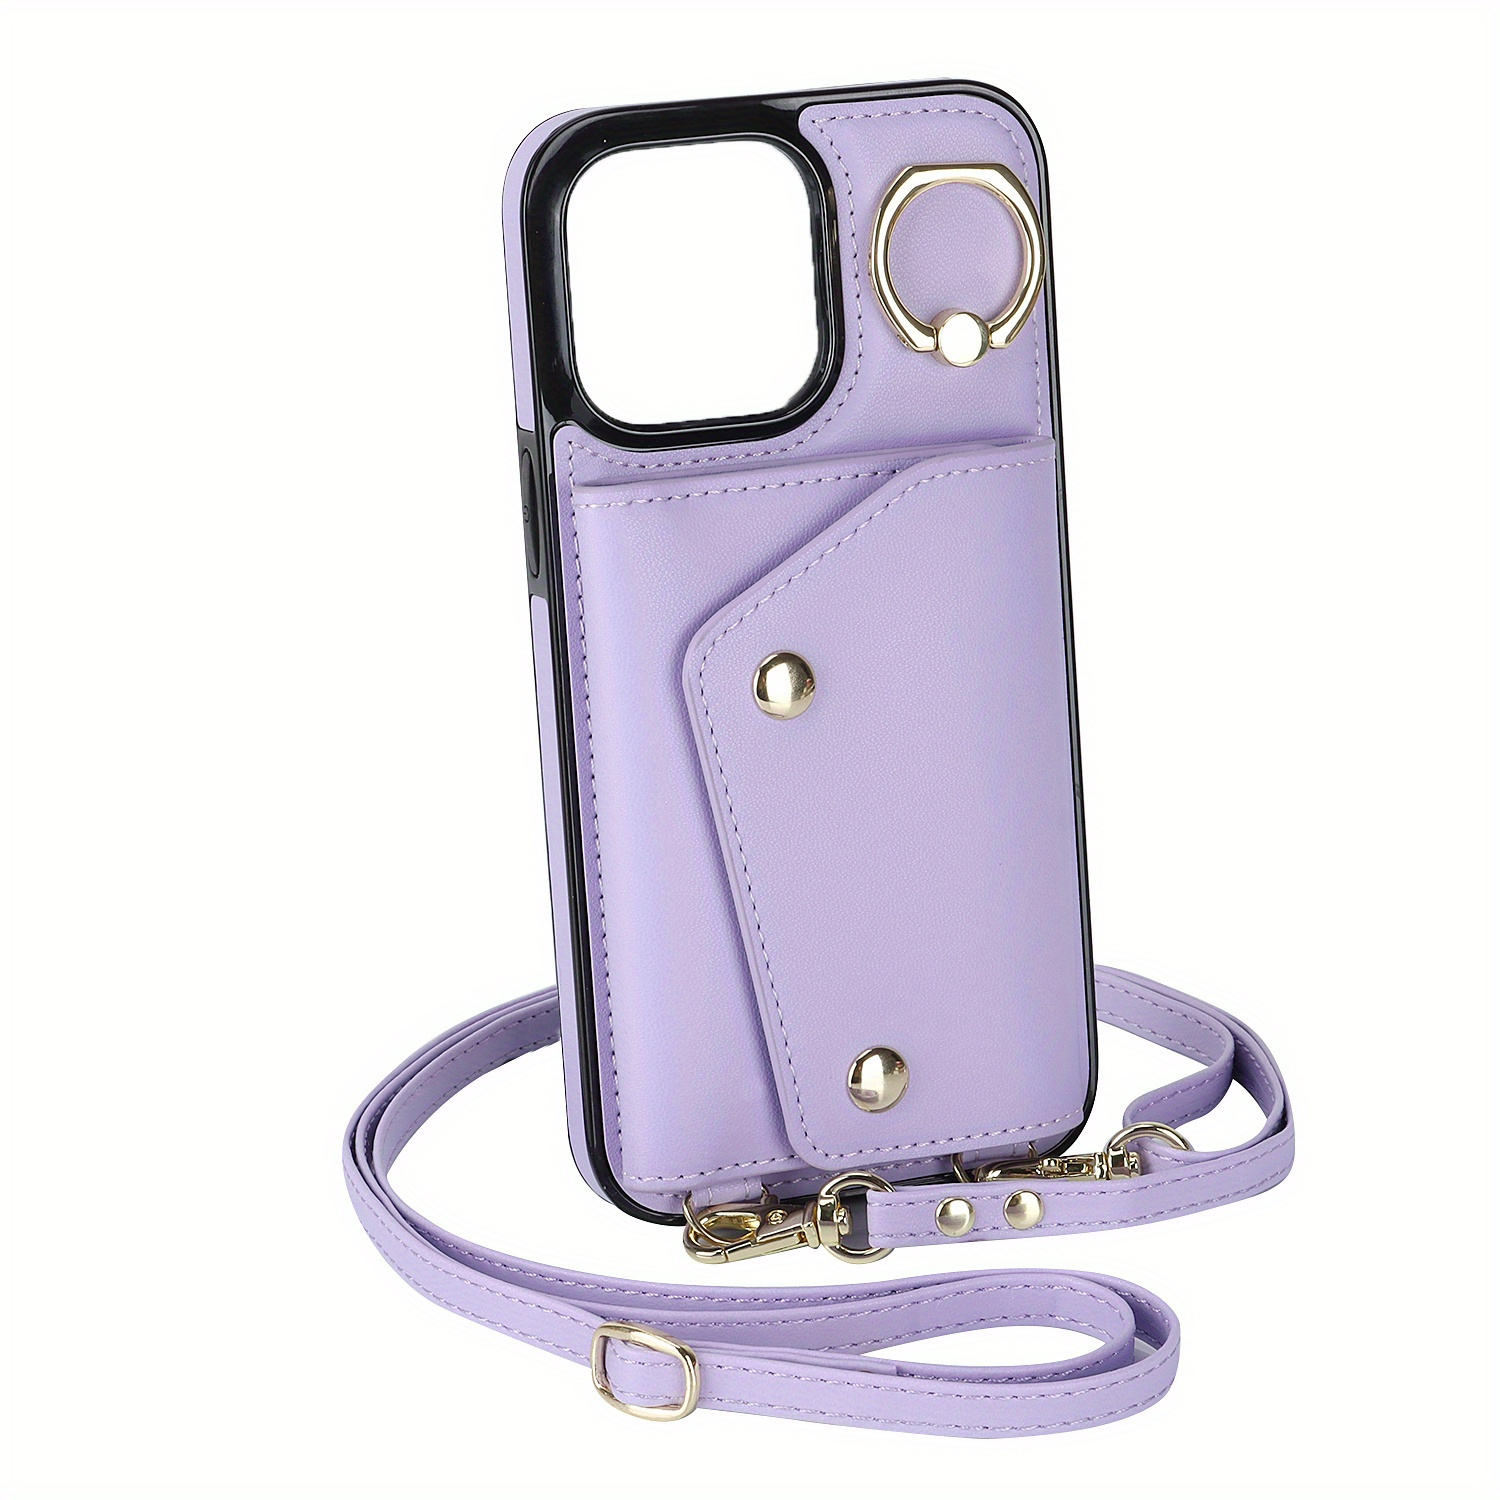 Vegan Leather iPhone Covers for Women - with Crossbody Lanyard